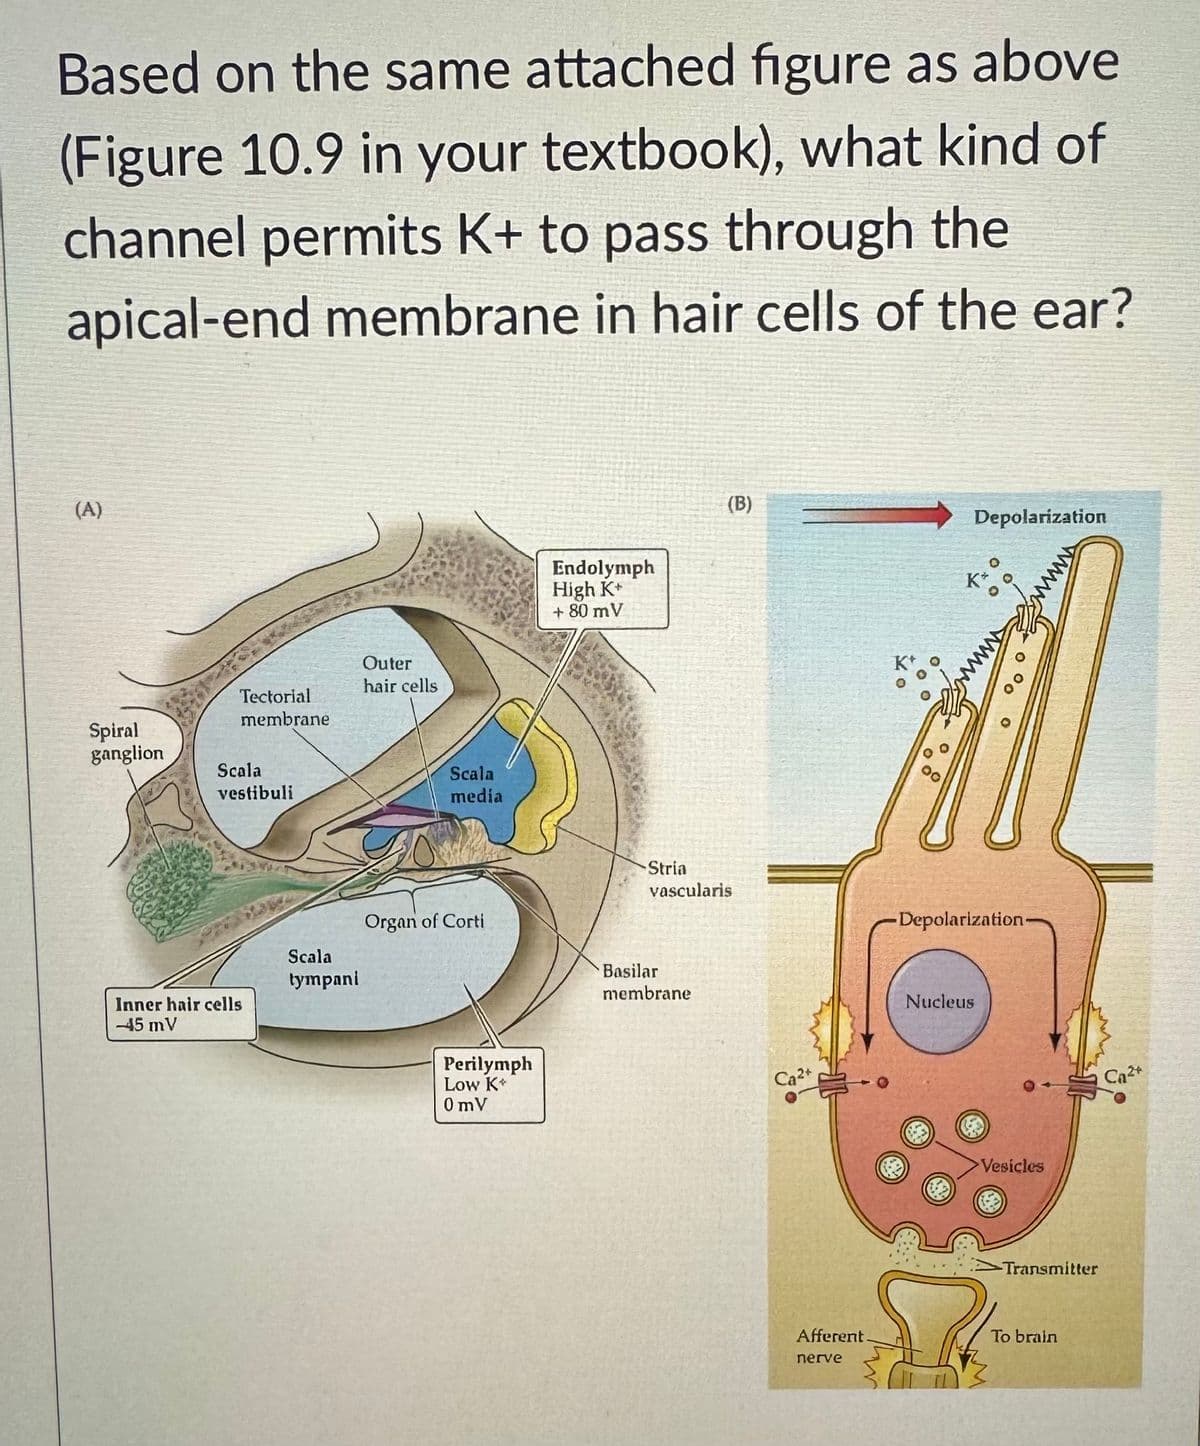 Based on the same attached figure as above
(Figure 10.9 in your textbook), what kind of
channel permits K+ to pass through the
apical-end membrane in hair cells of the ear?
(A)
Spiral
ganglion
Tectorial
membrane
Scala
vestibuli
Inner hair cells
-45 mV
Scala
tympani
Outer
hair cells
Scala
media
Organ of Corti
Perilymph
Low K+
0mV
Endolymph
High K+
+80 mV
(B)
Stria
vascularis
Basilar
membrane
Ca²+
Afferent.
nerve
Depolarization
O
Nucleus
wwww.
00
-Depolarization.
Vesicles
-Transmitter
To brain
C₂24